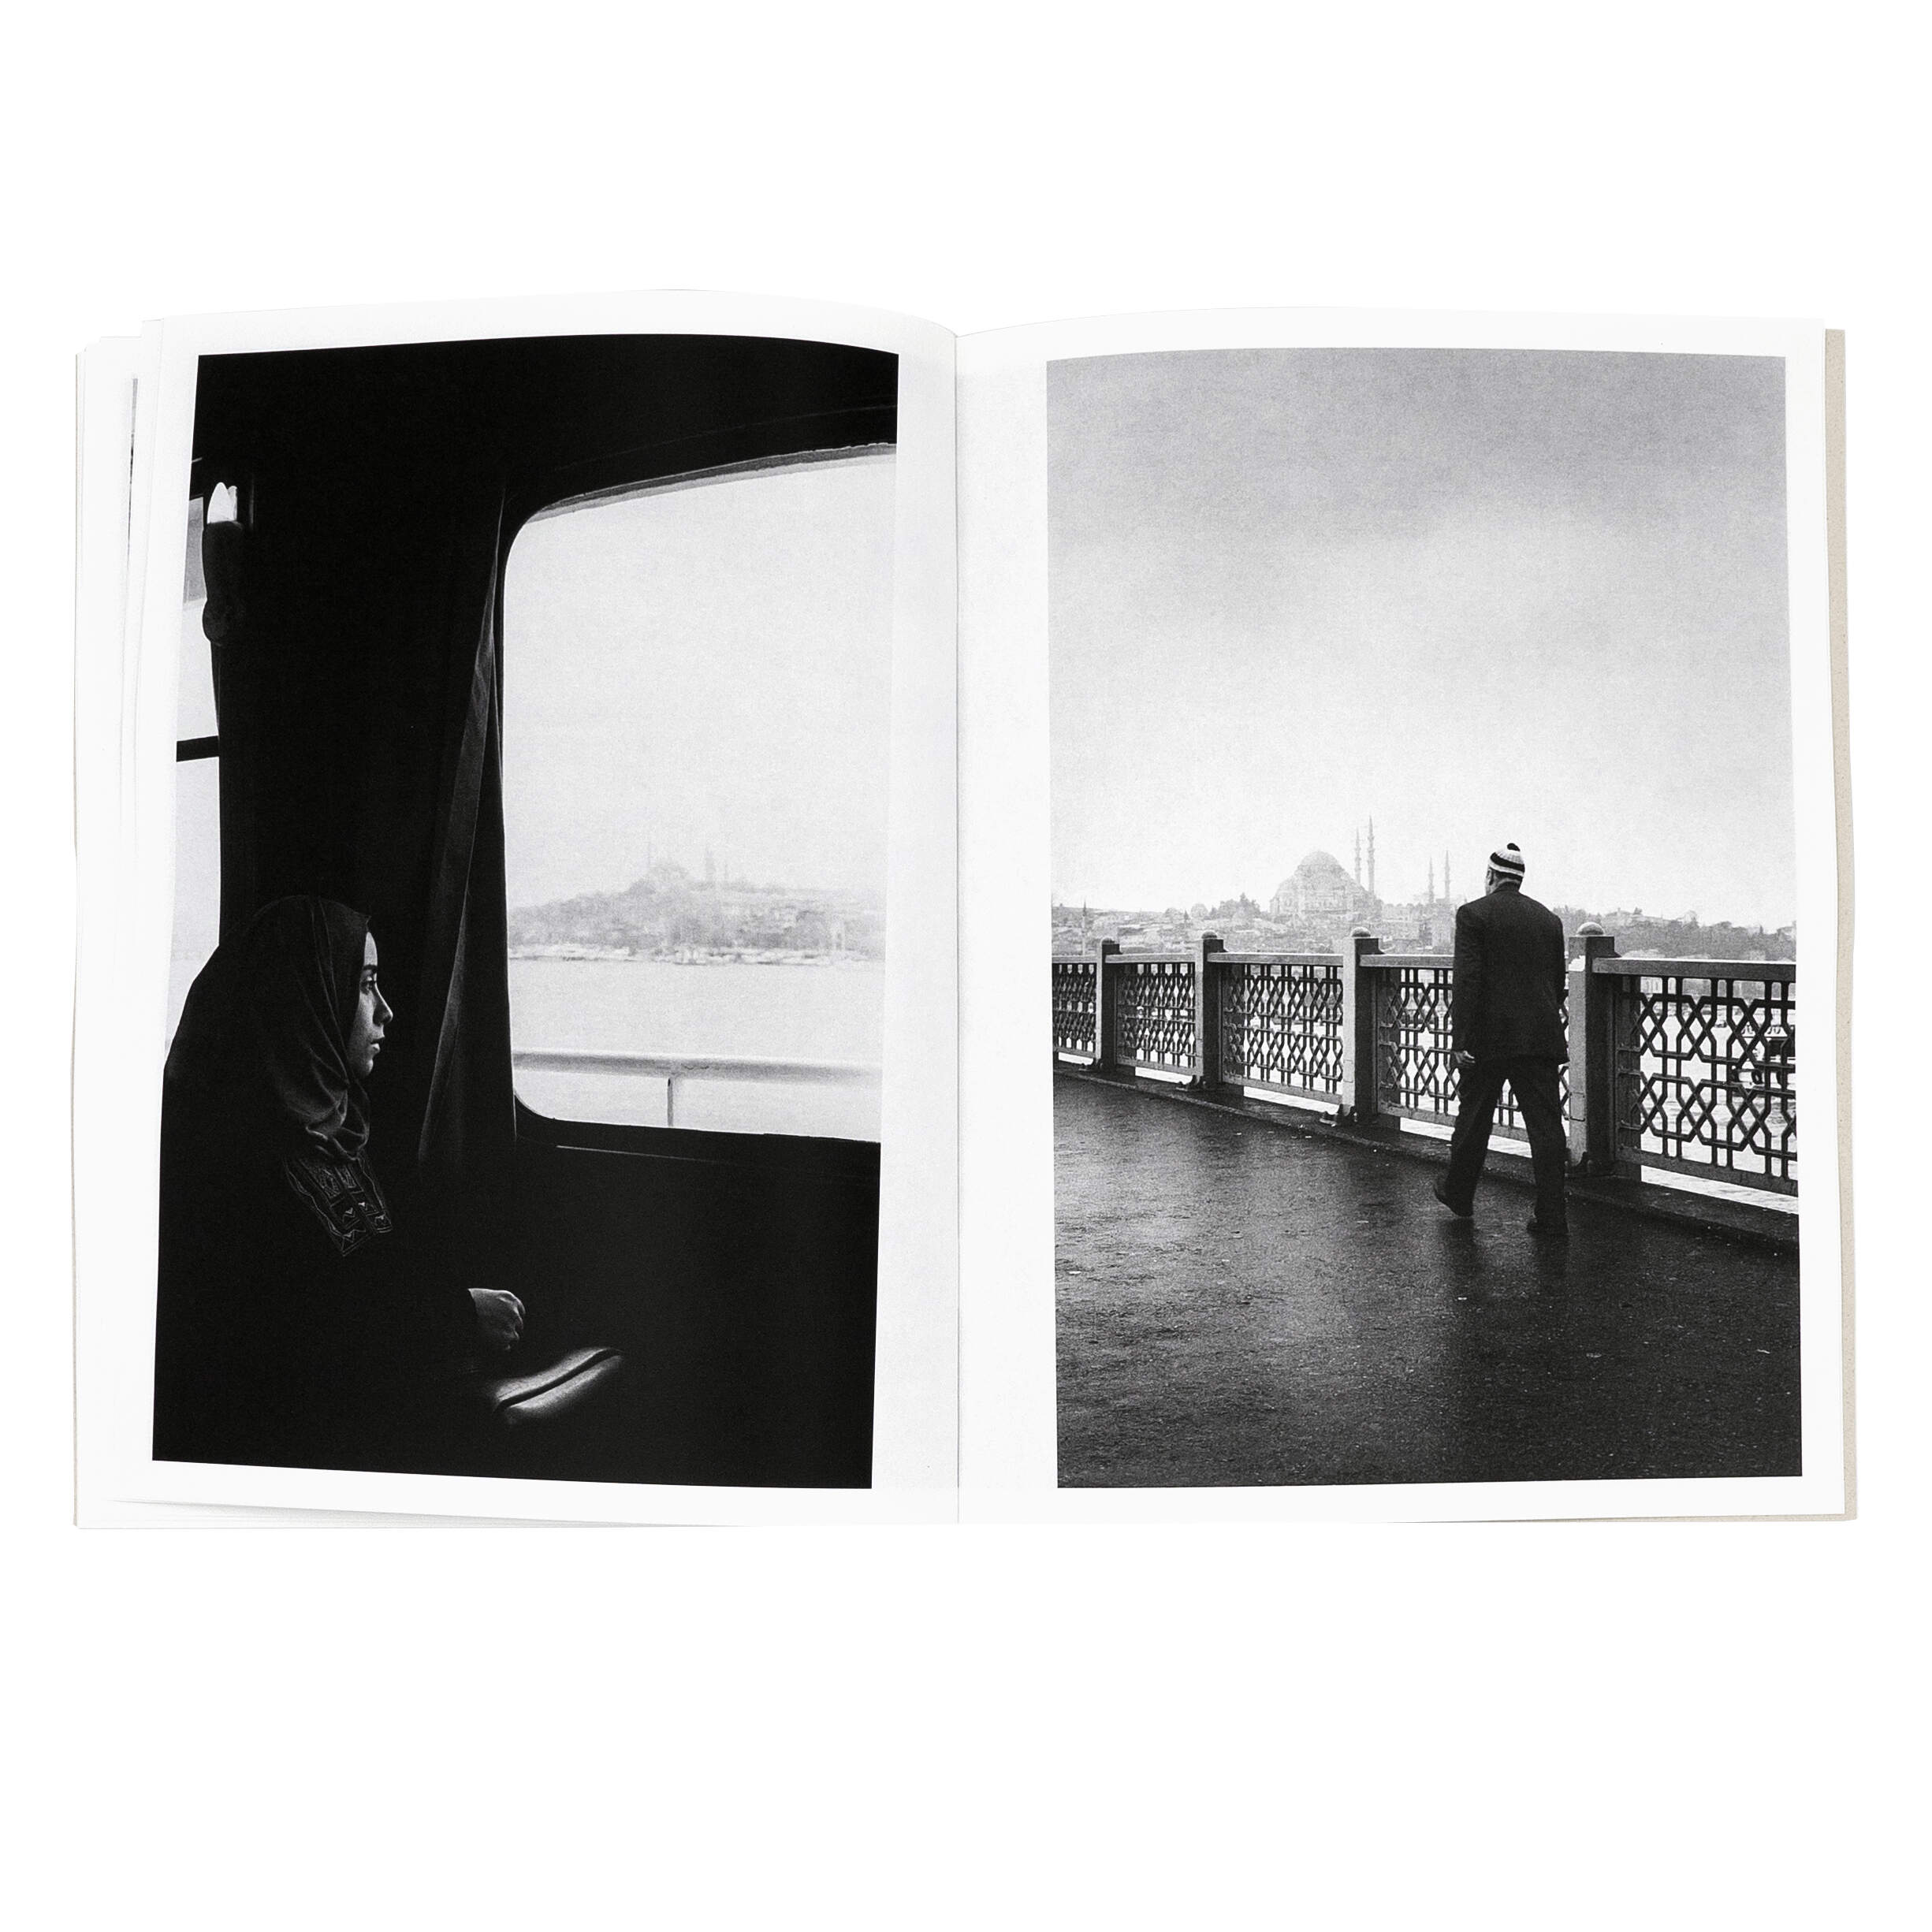 FOLIO/Istanbul - Thierry Clech